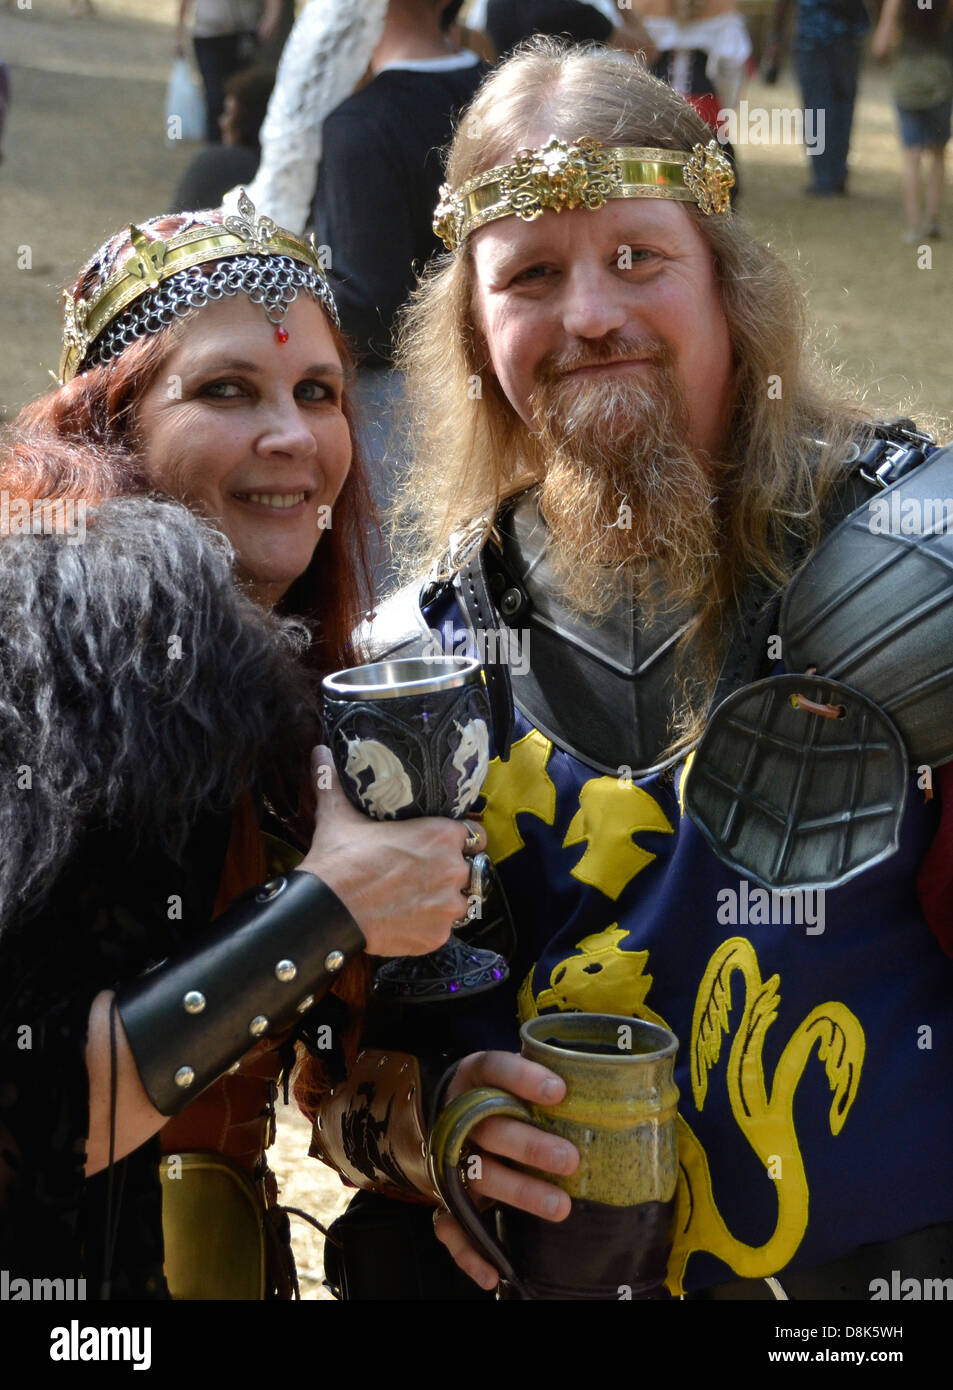 Couple dressed in medieval outfits during the Renaissance festival in ...